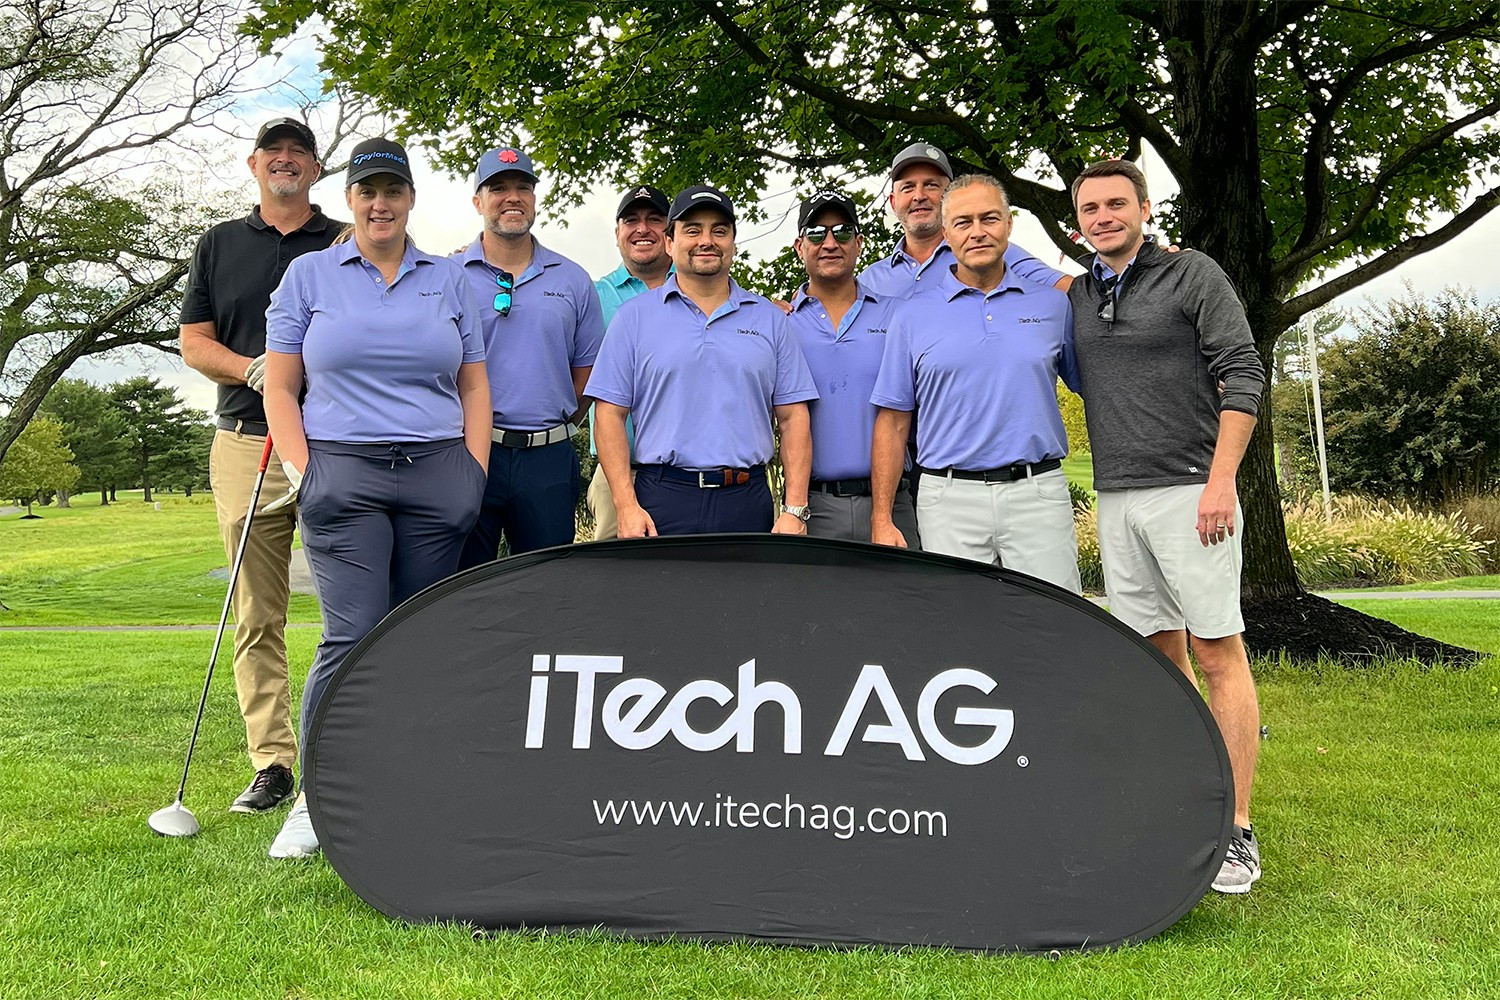 Itechians golf for a good cause, in support of a local charity helping abused children.